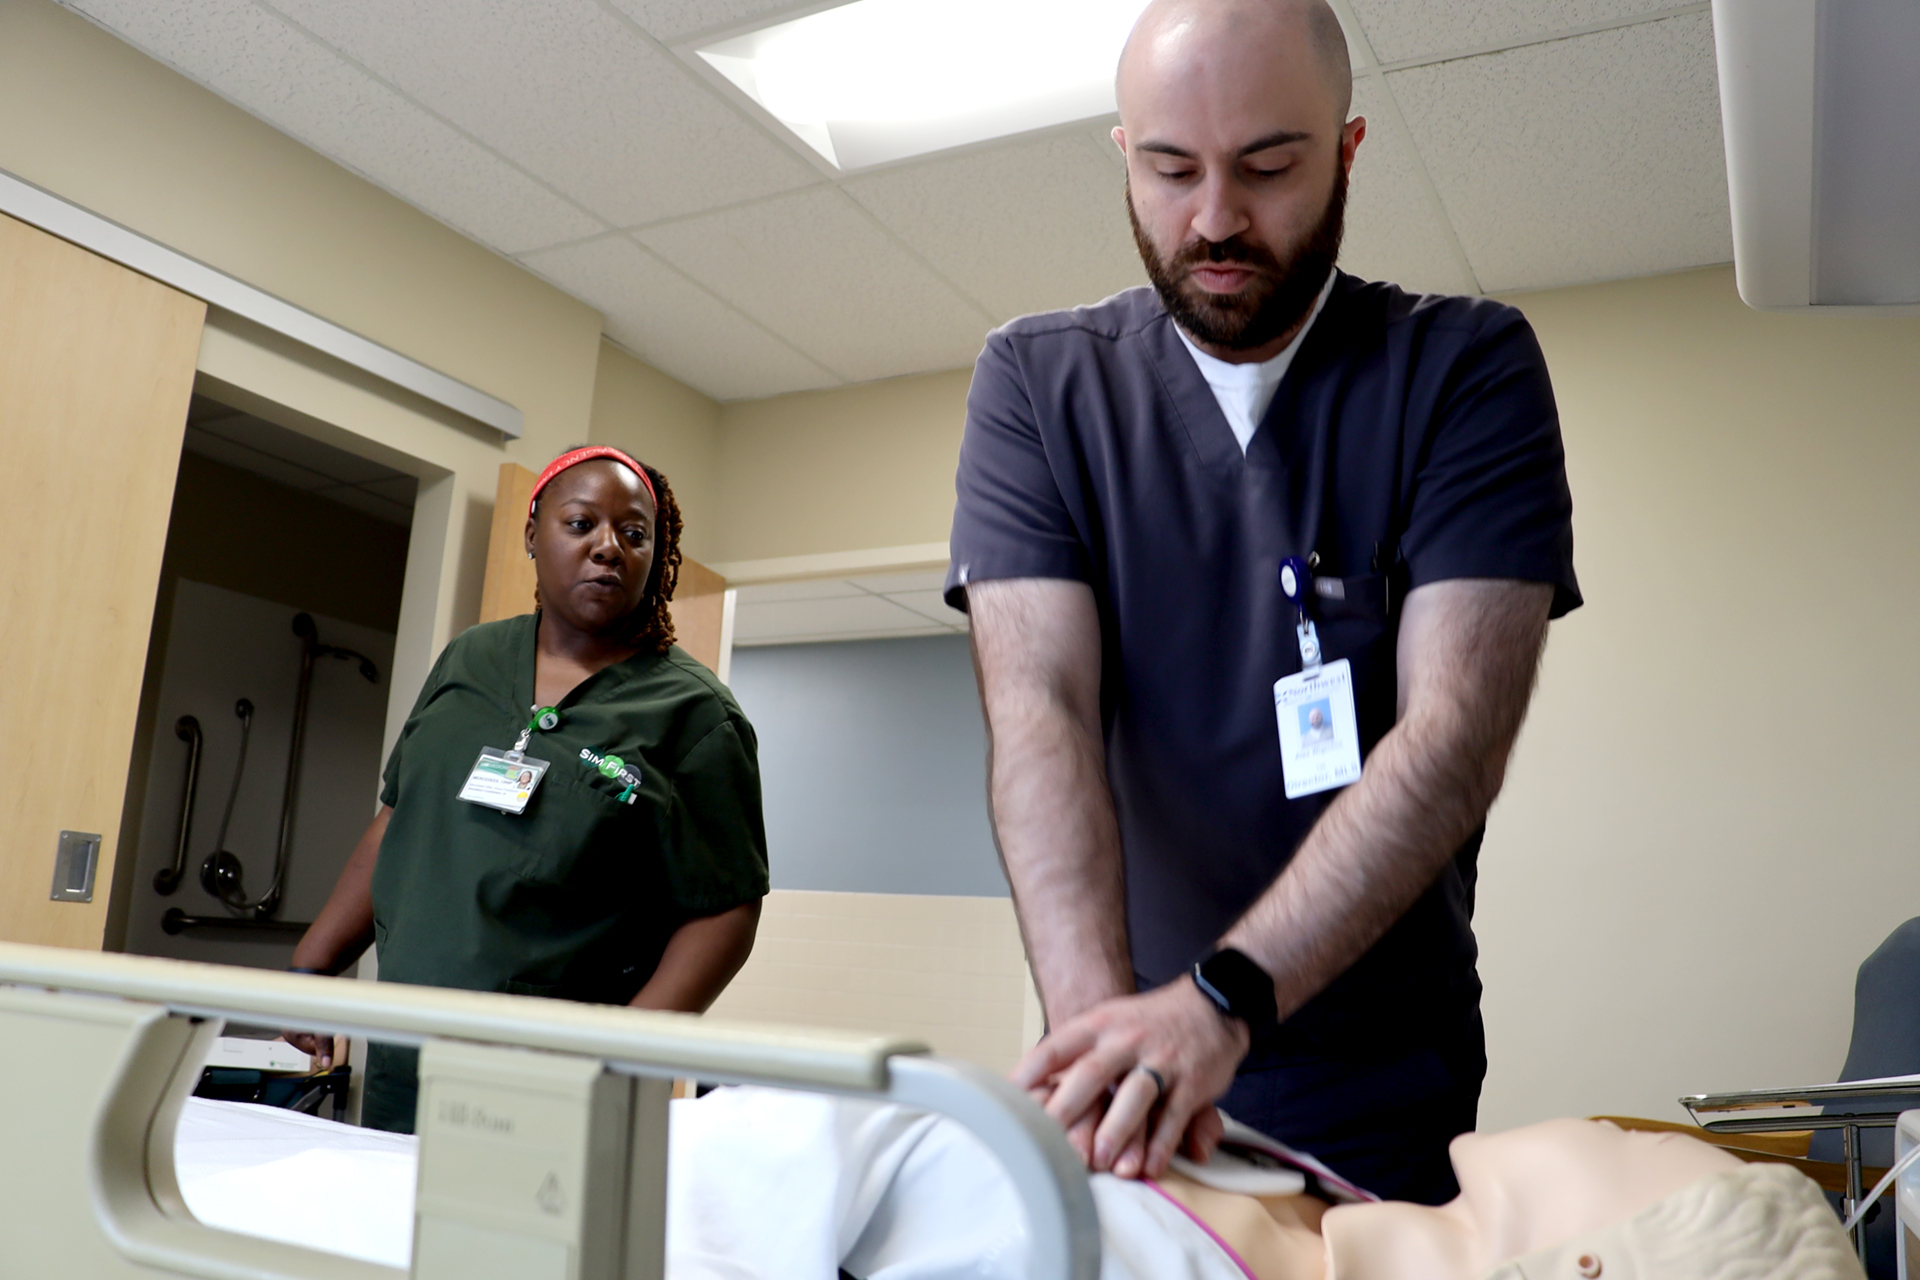 A woman in green medical scrubs instructs a man in gray medical scrubs in a simulation exercise.